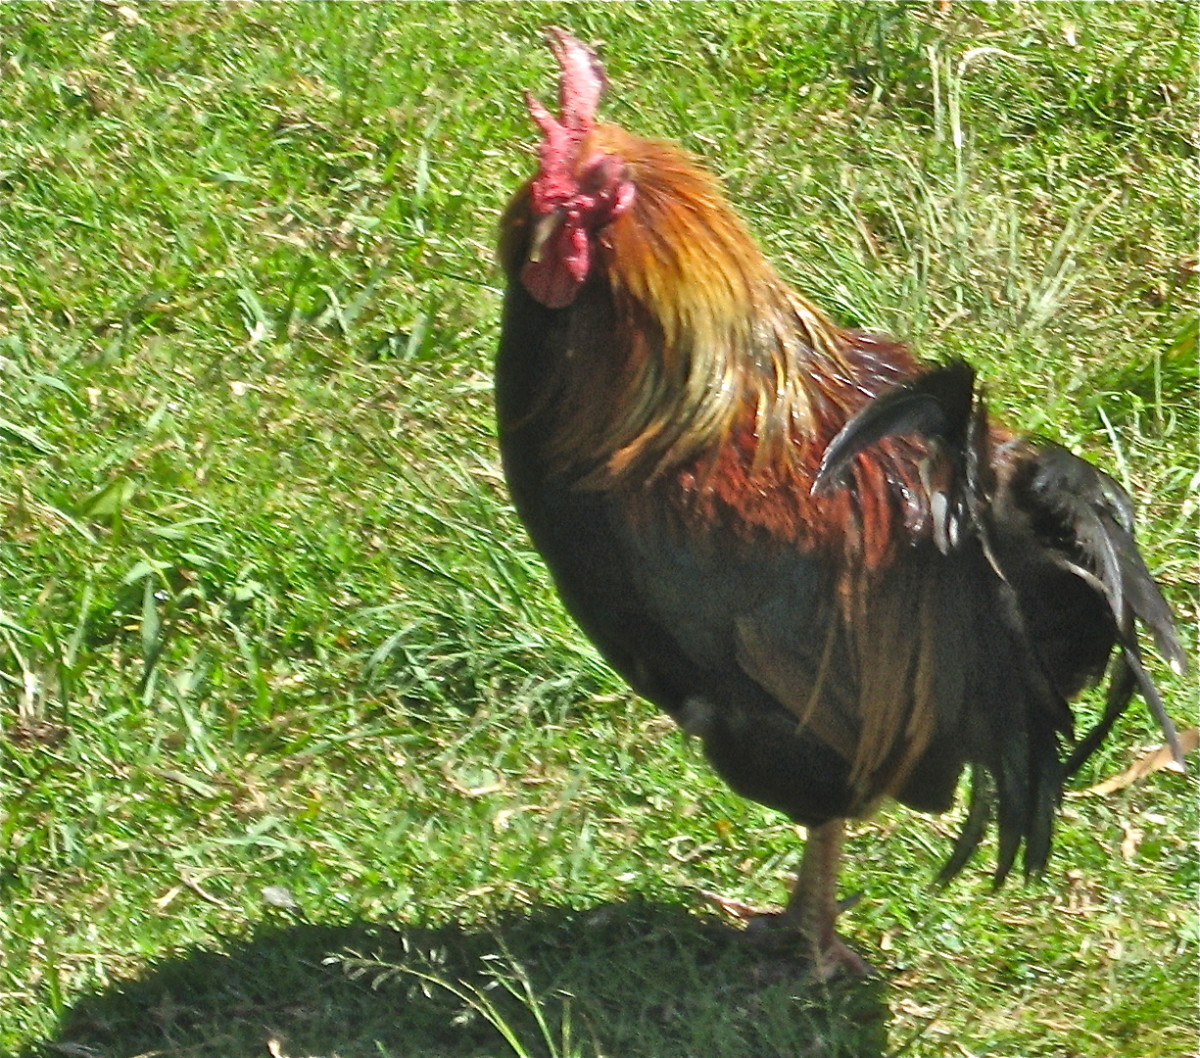 One of the zillion chickens that cover the island